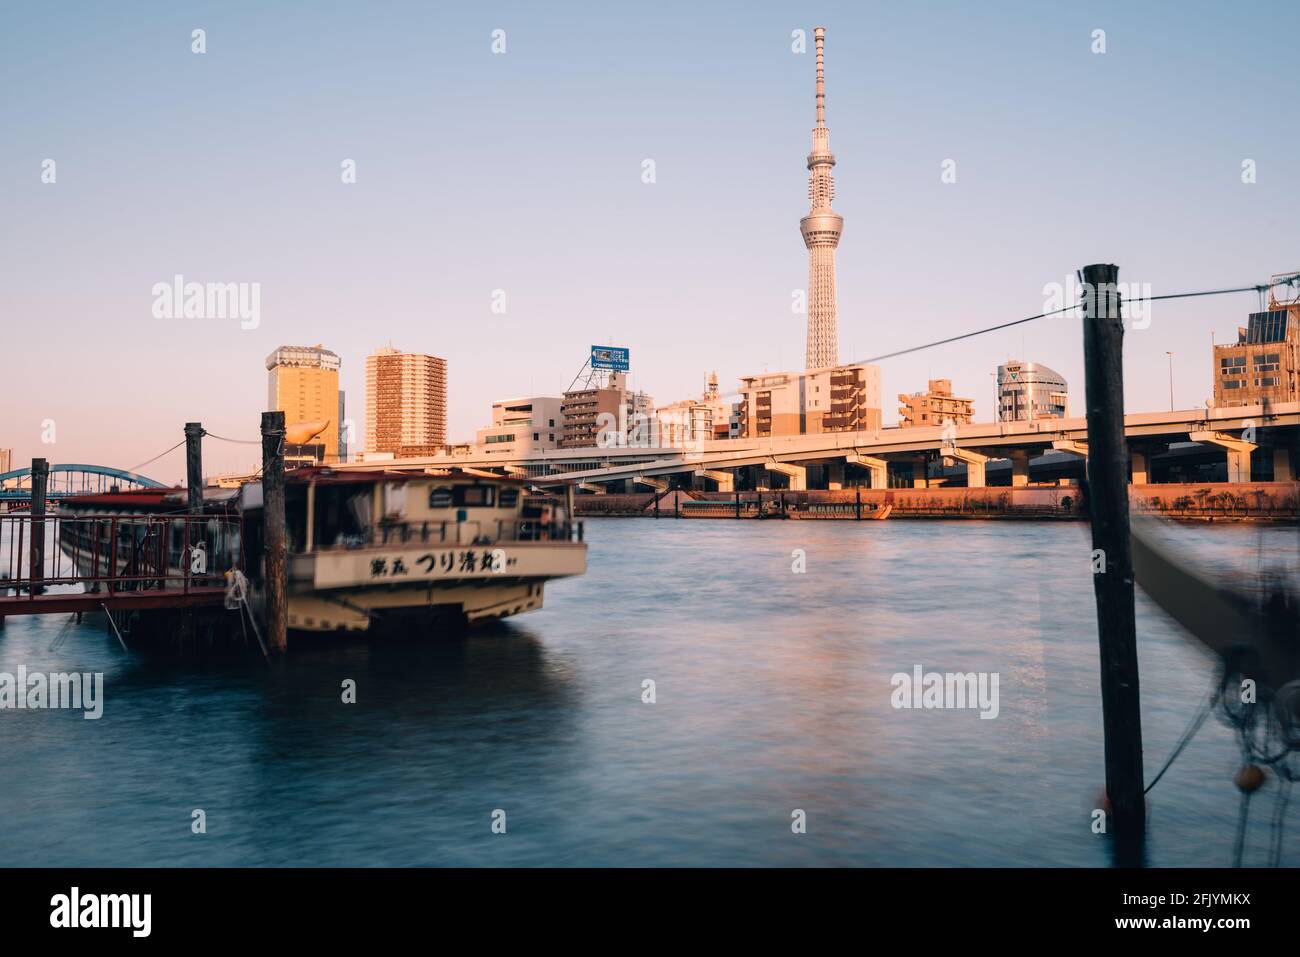 Tokyo, Japan - December 12, 2015: Tokyo Skytree and Sumida River, Tokyo, Japan. Tokyo Skytree at 634m, is the tallest free-standing broadcasting tower Stock Photo